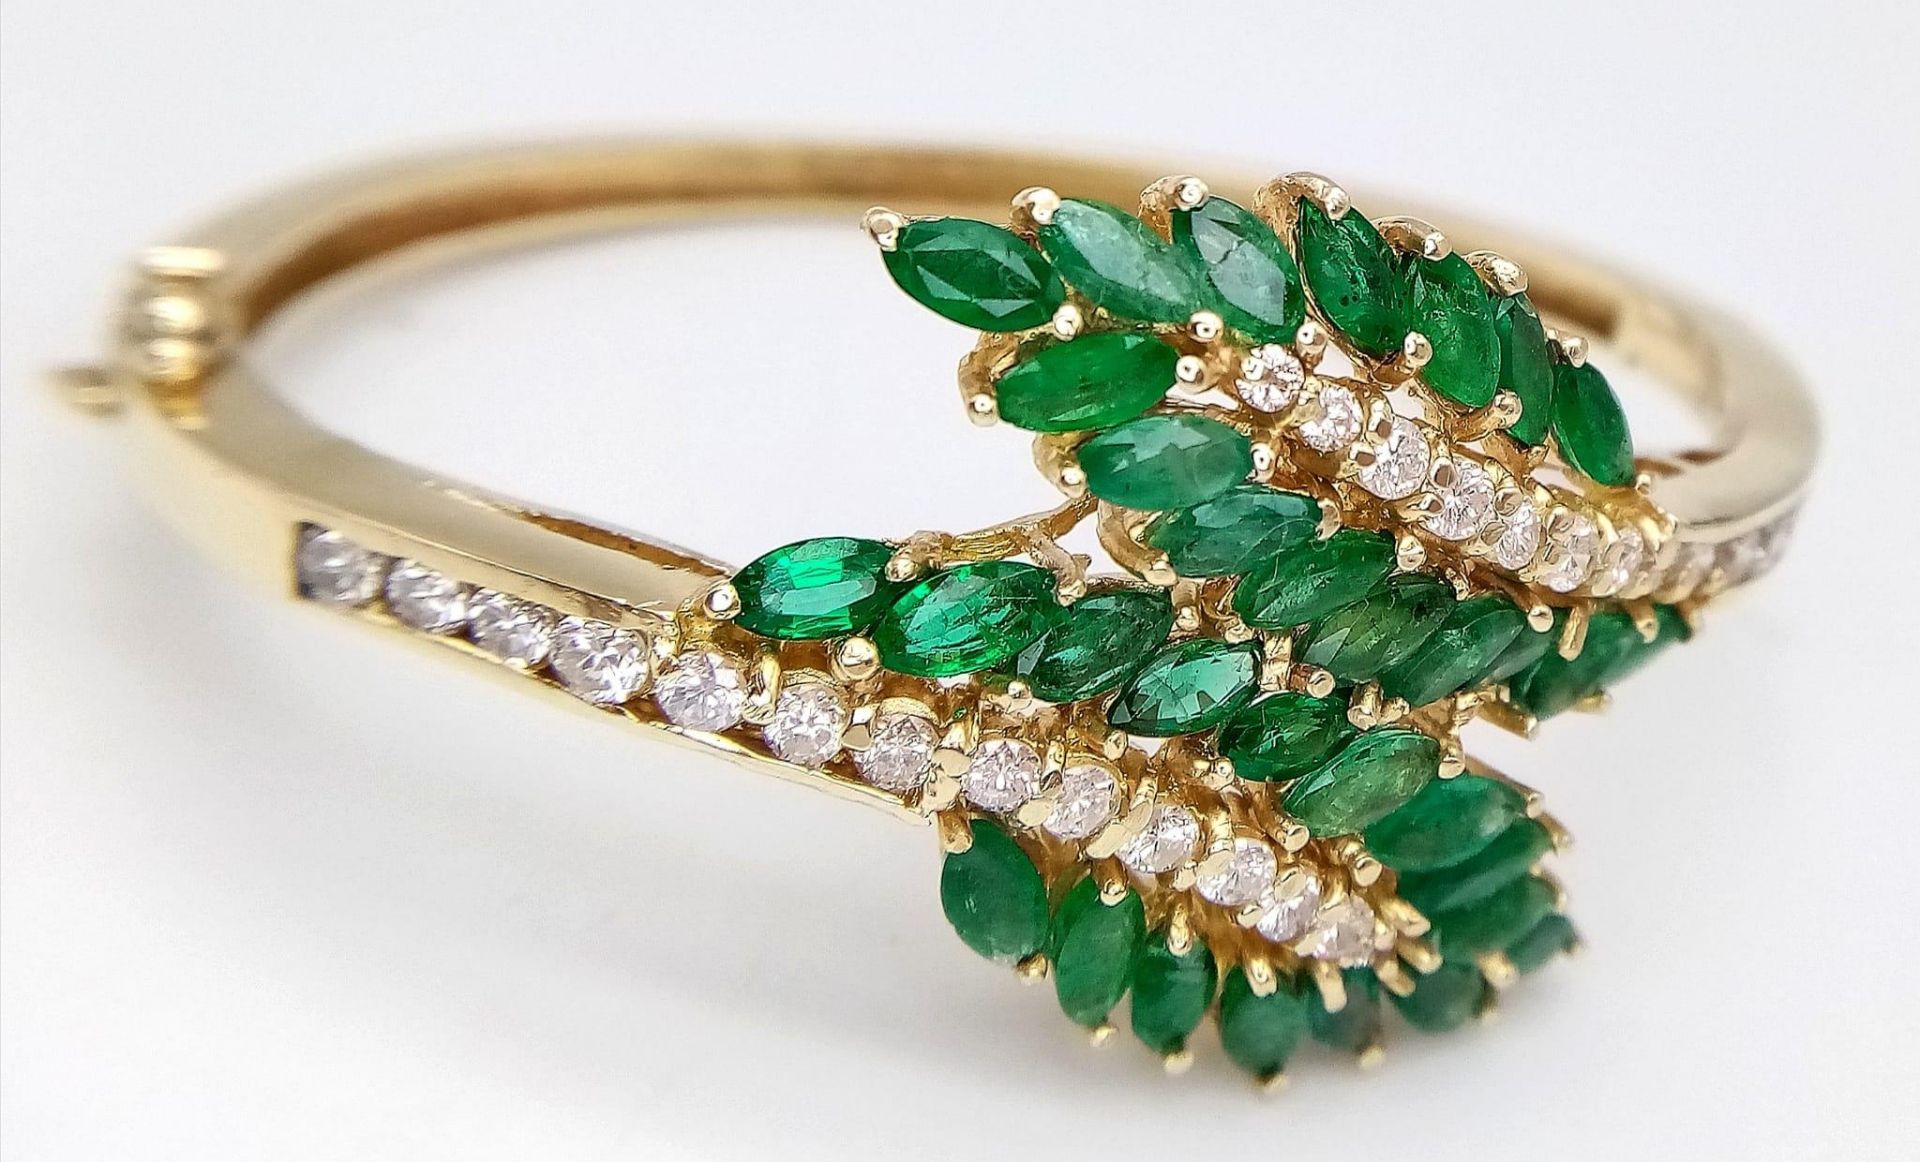 A DIAMOND AND EMERALD LEAF DESIGN BANGLE IN CROSSOVER STYLE SET IN18K GOLD . 33.5gms 10457 - Bild 2 aus 15